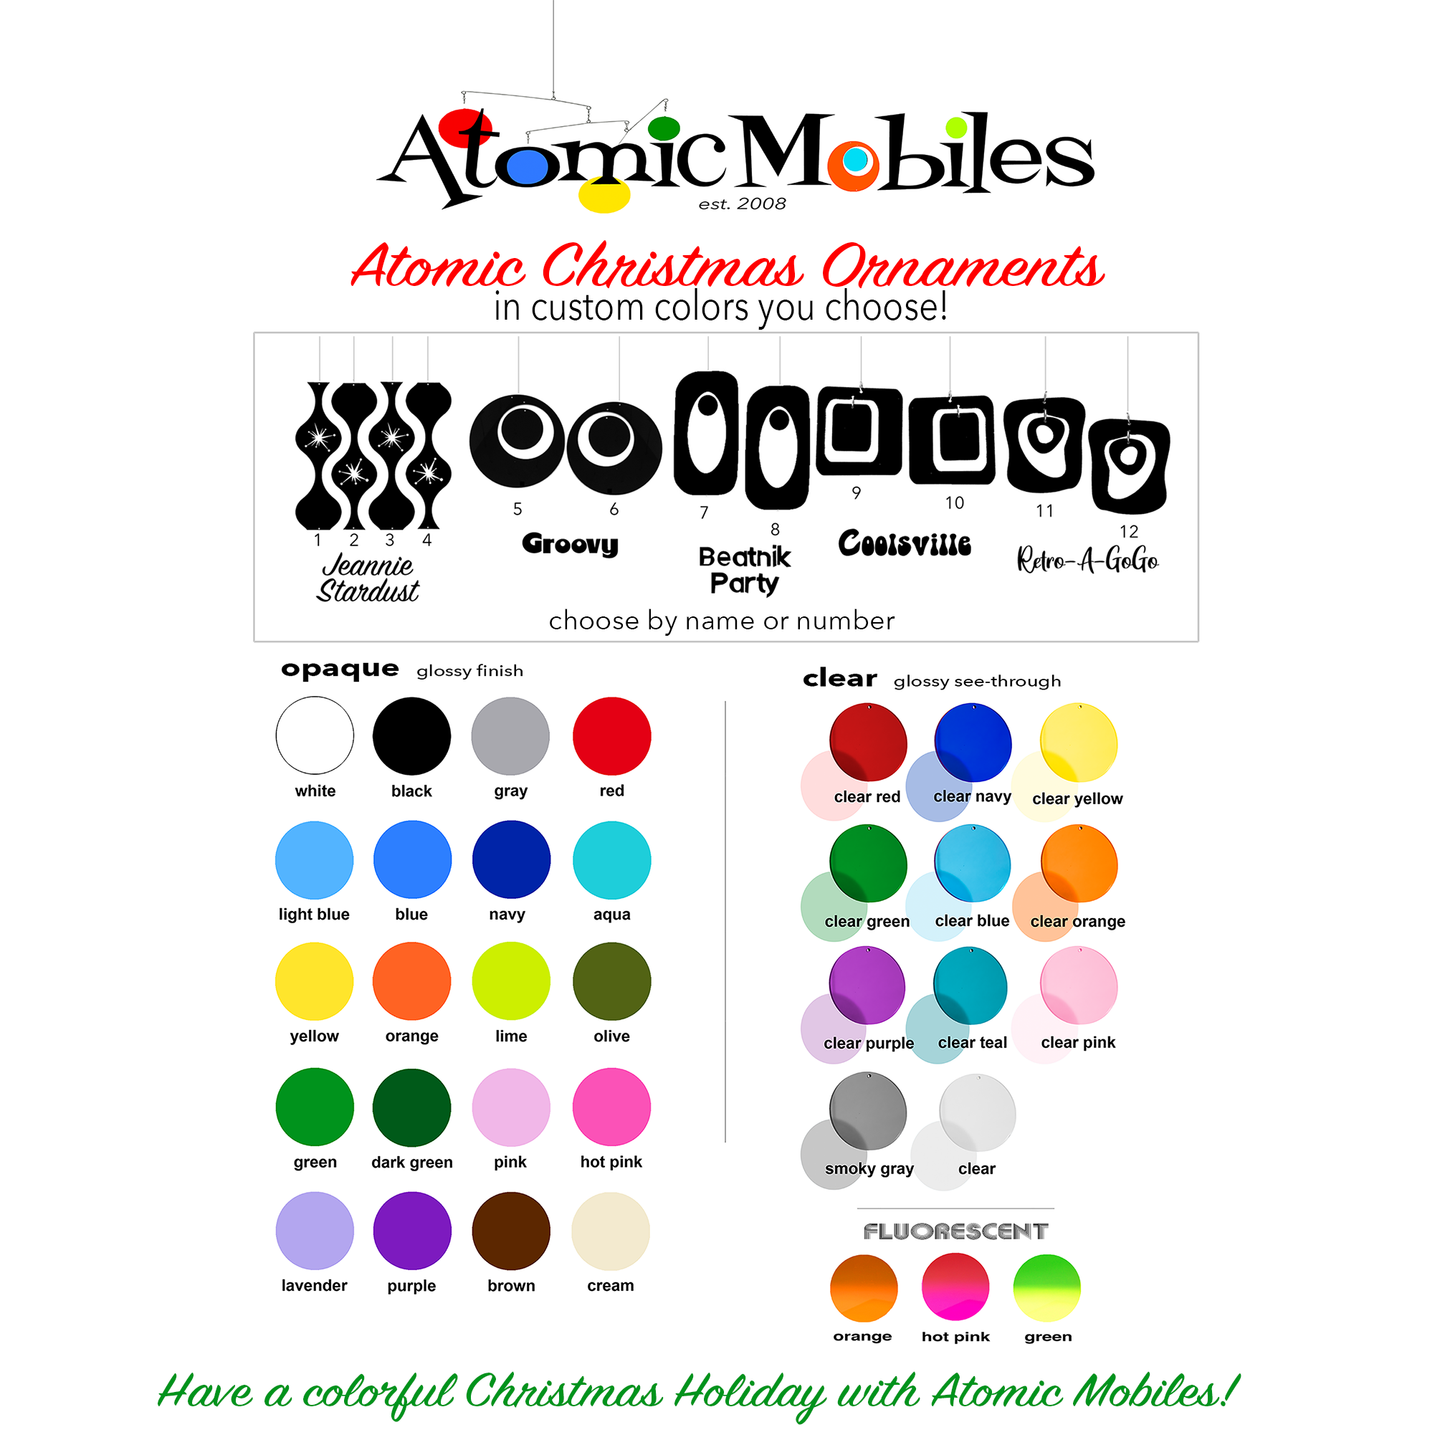 Color Chart for Christmas Ornaments in 34 beautiful colors - not just red and green! by AtomicMobiles.com